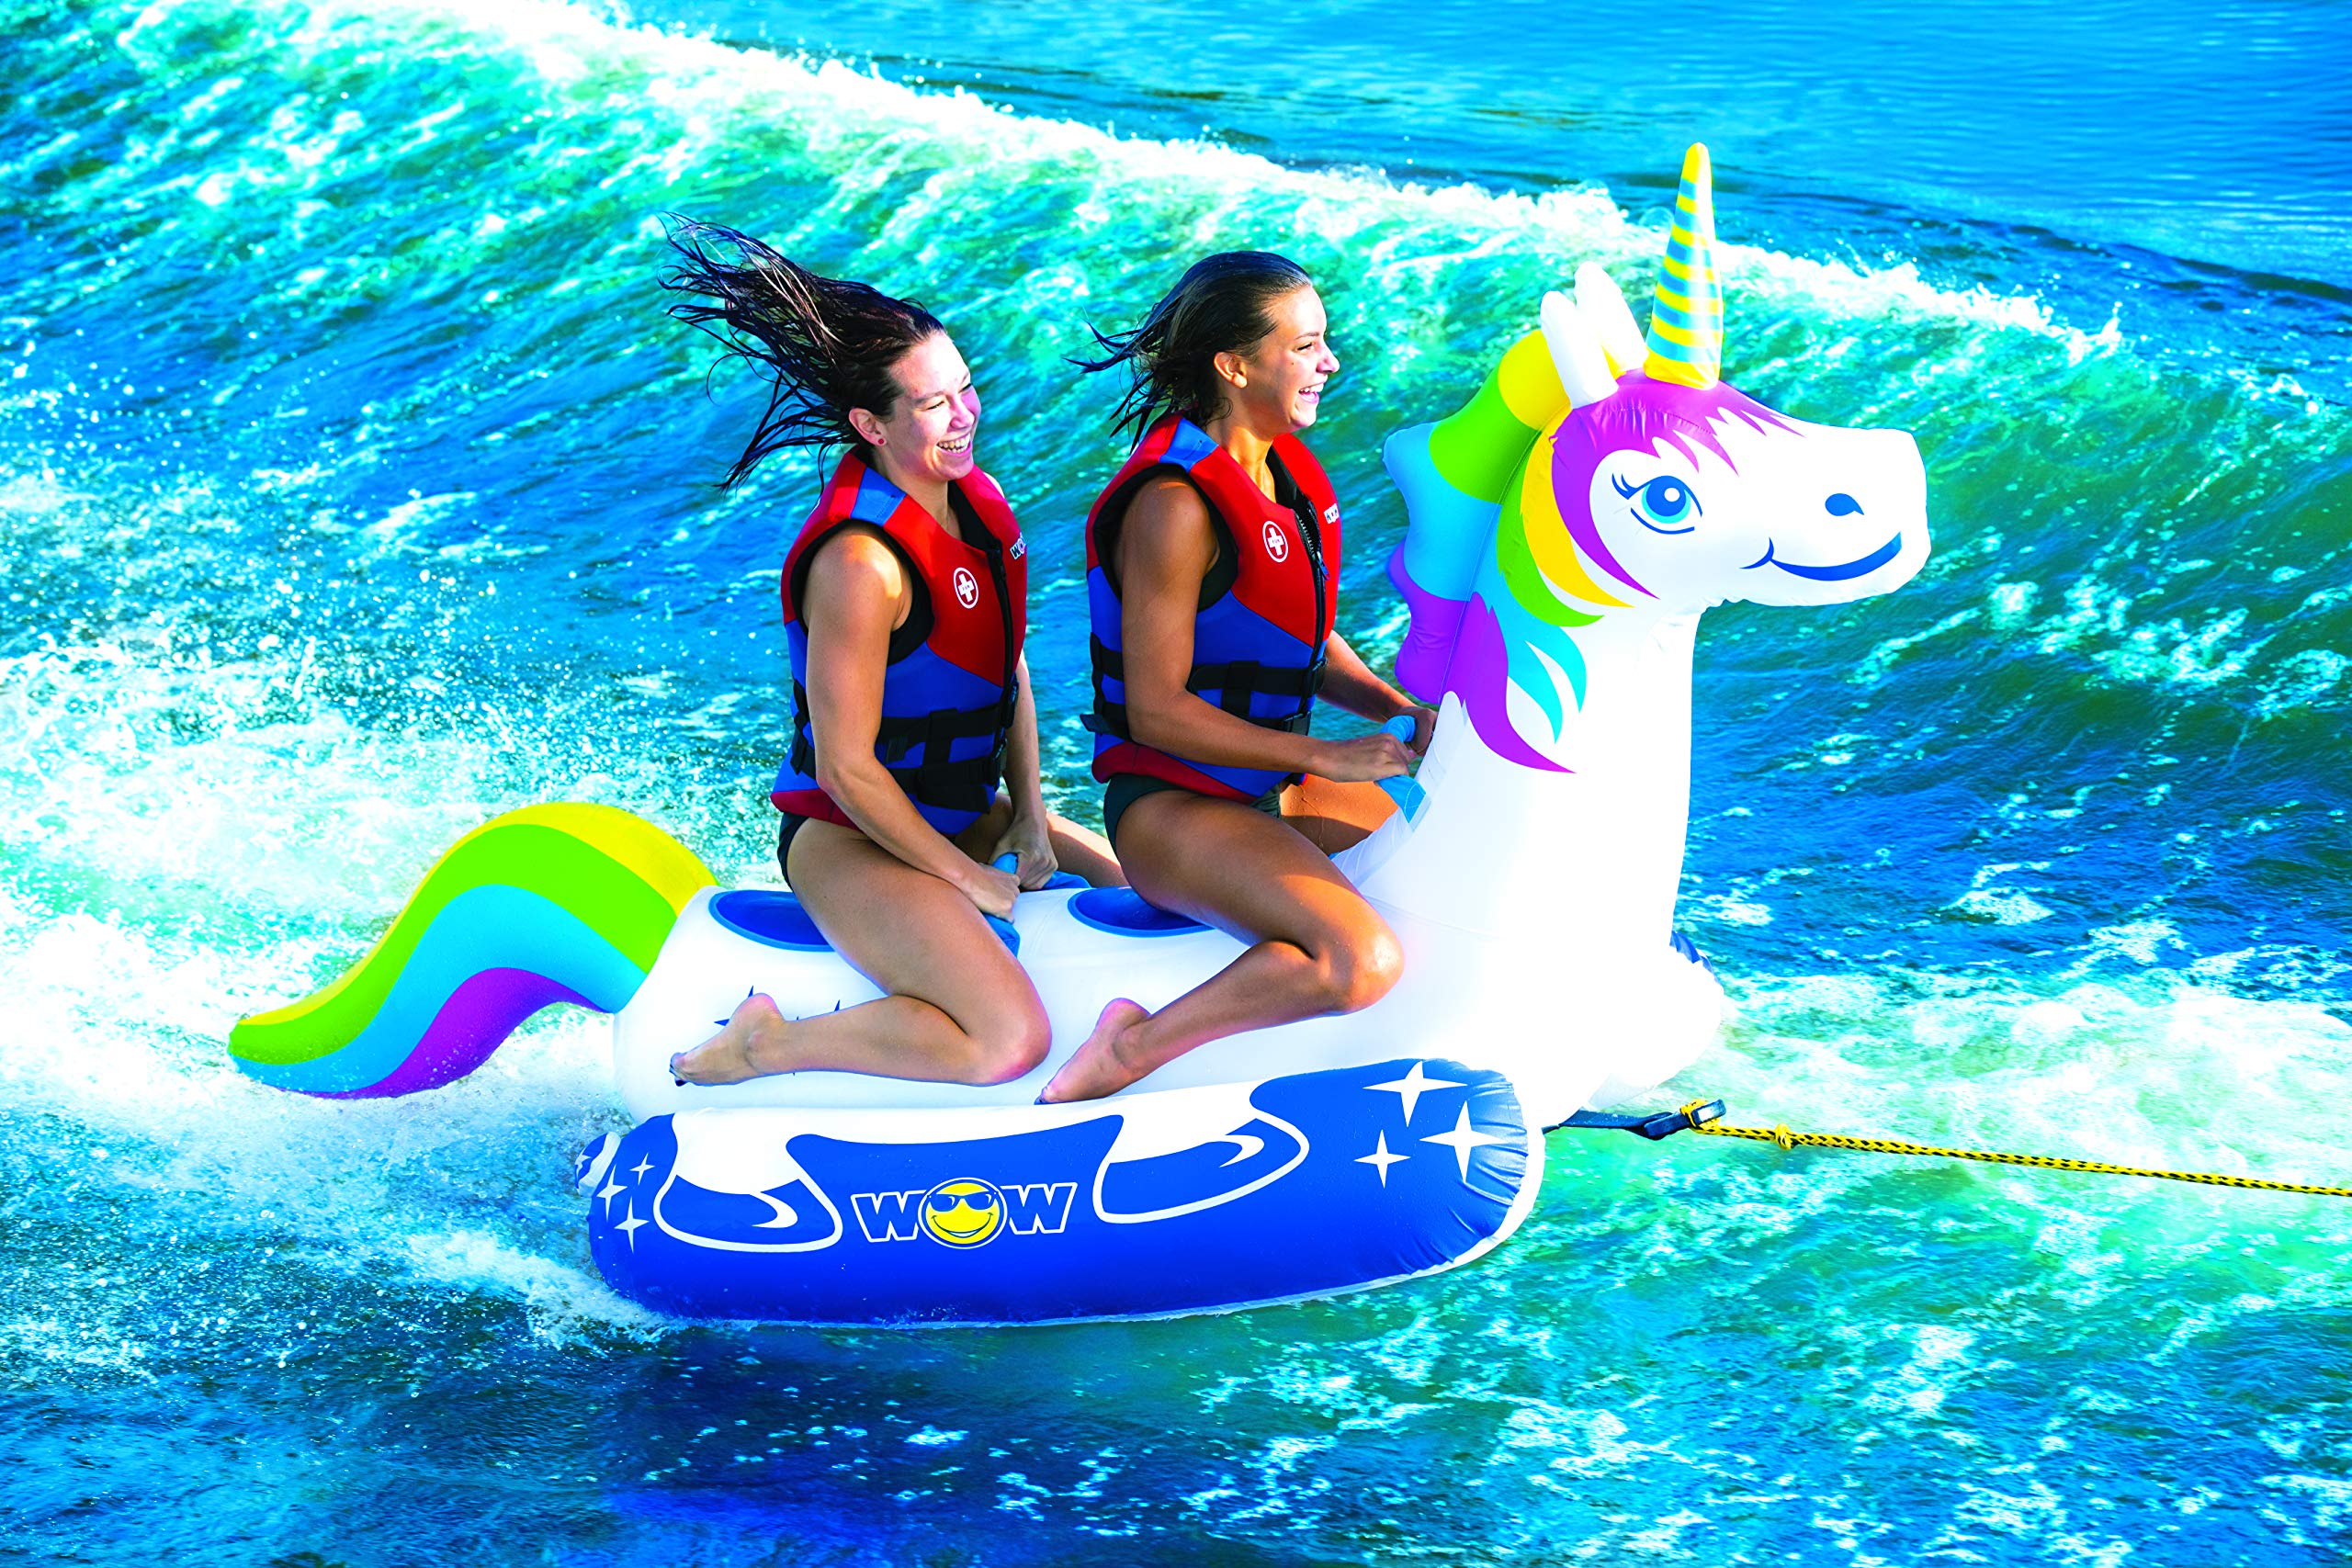 WOW World of Watersports Unicorn 1 or 2 Person Inflatable Towable Tube for Boating, 20-1020